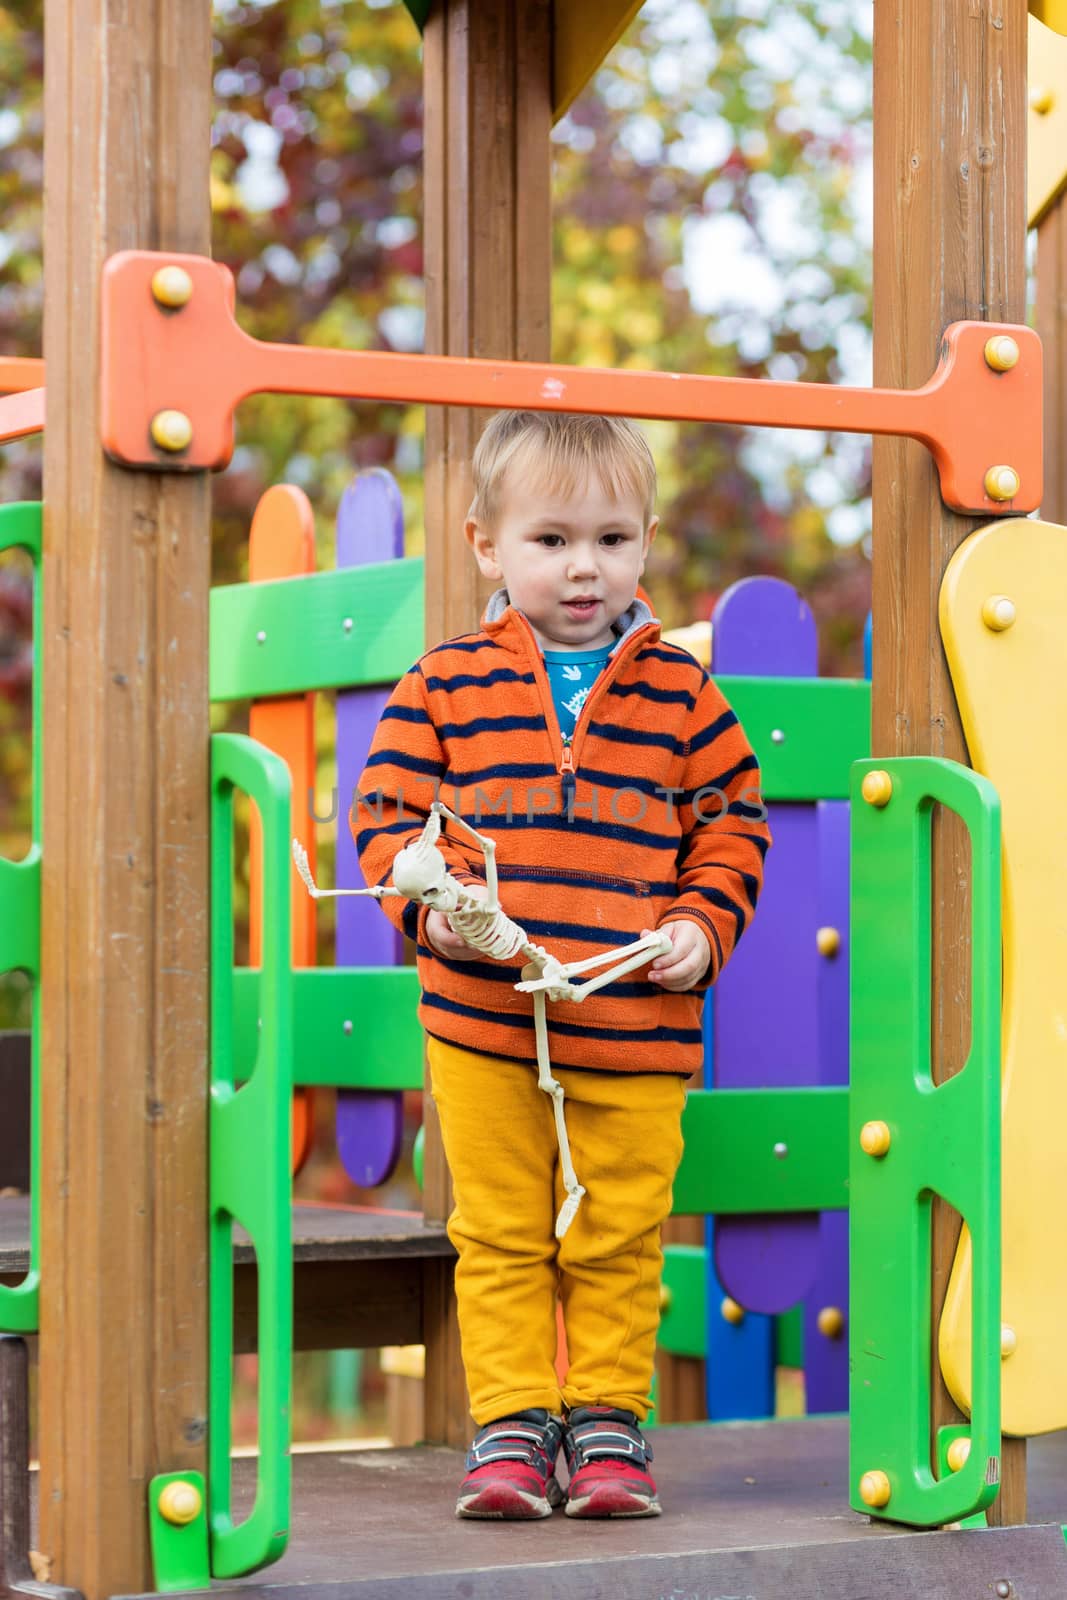 A small child in a striped sweater holds a skeleton toy in his hands and rides down a slide on the playground